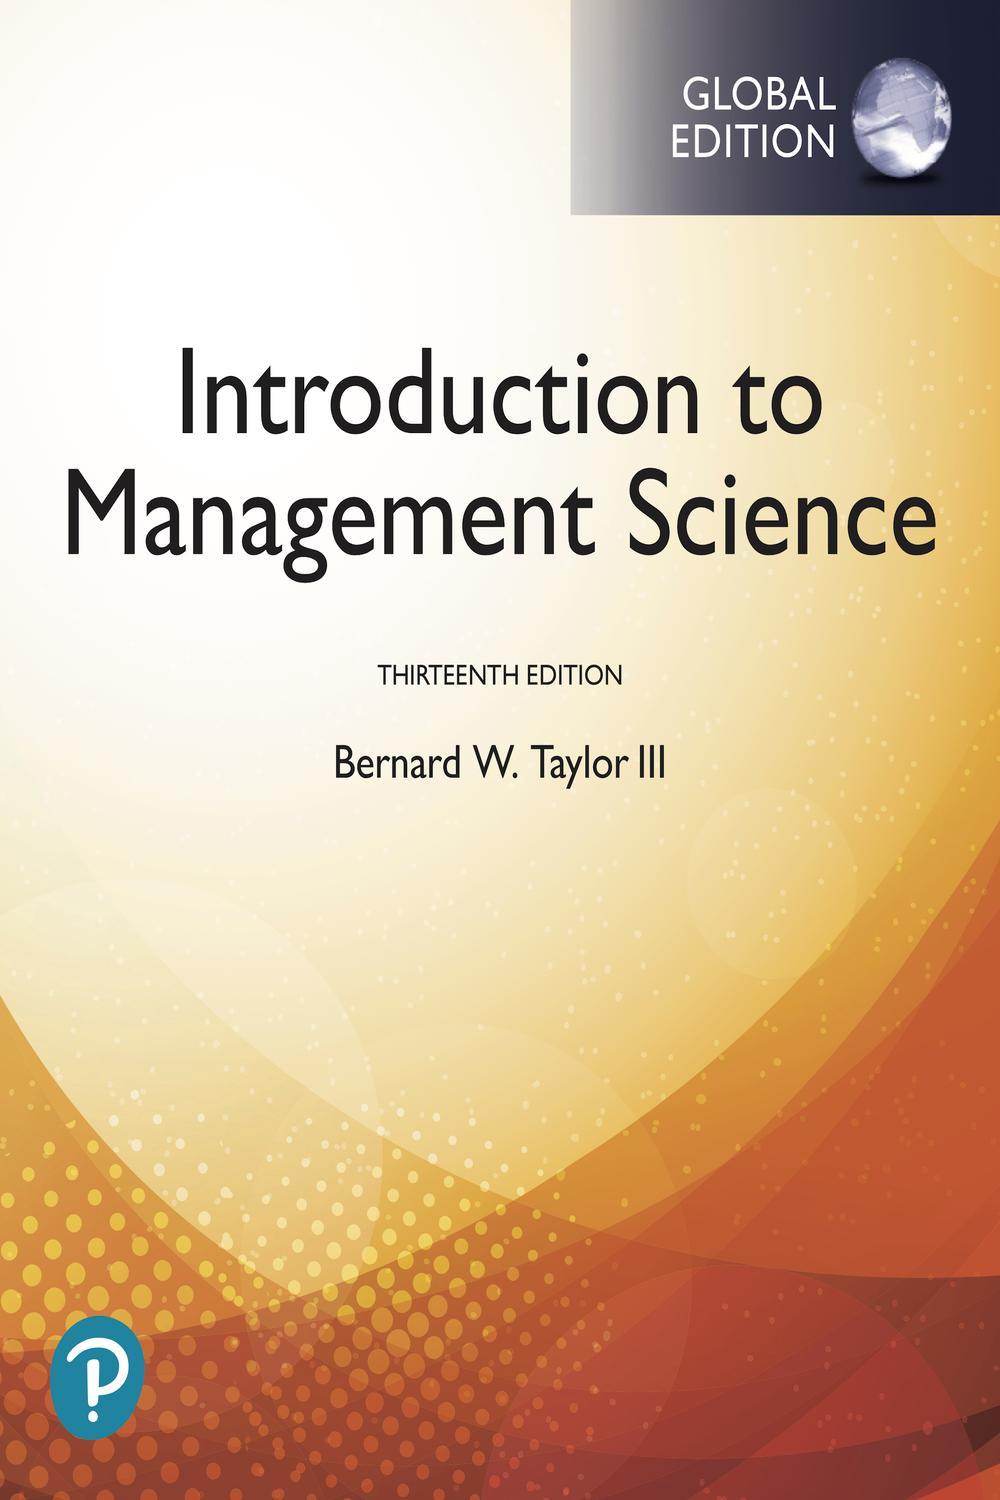 PDF] Introduction to Management Science, Global Edition by Bernard 